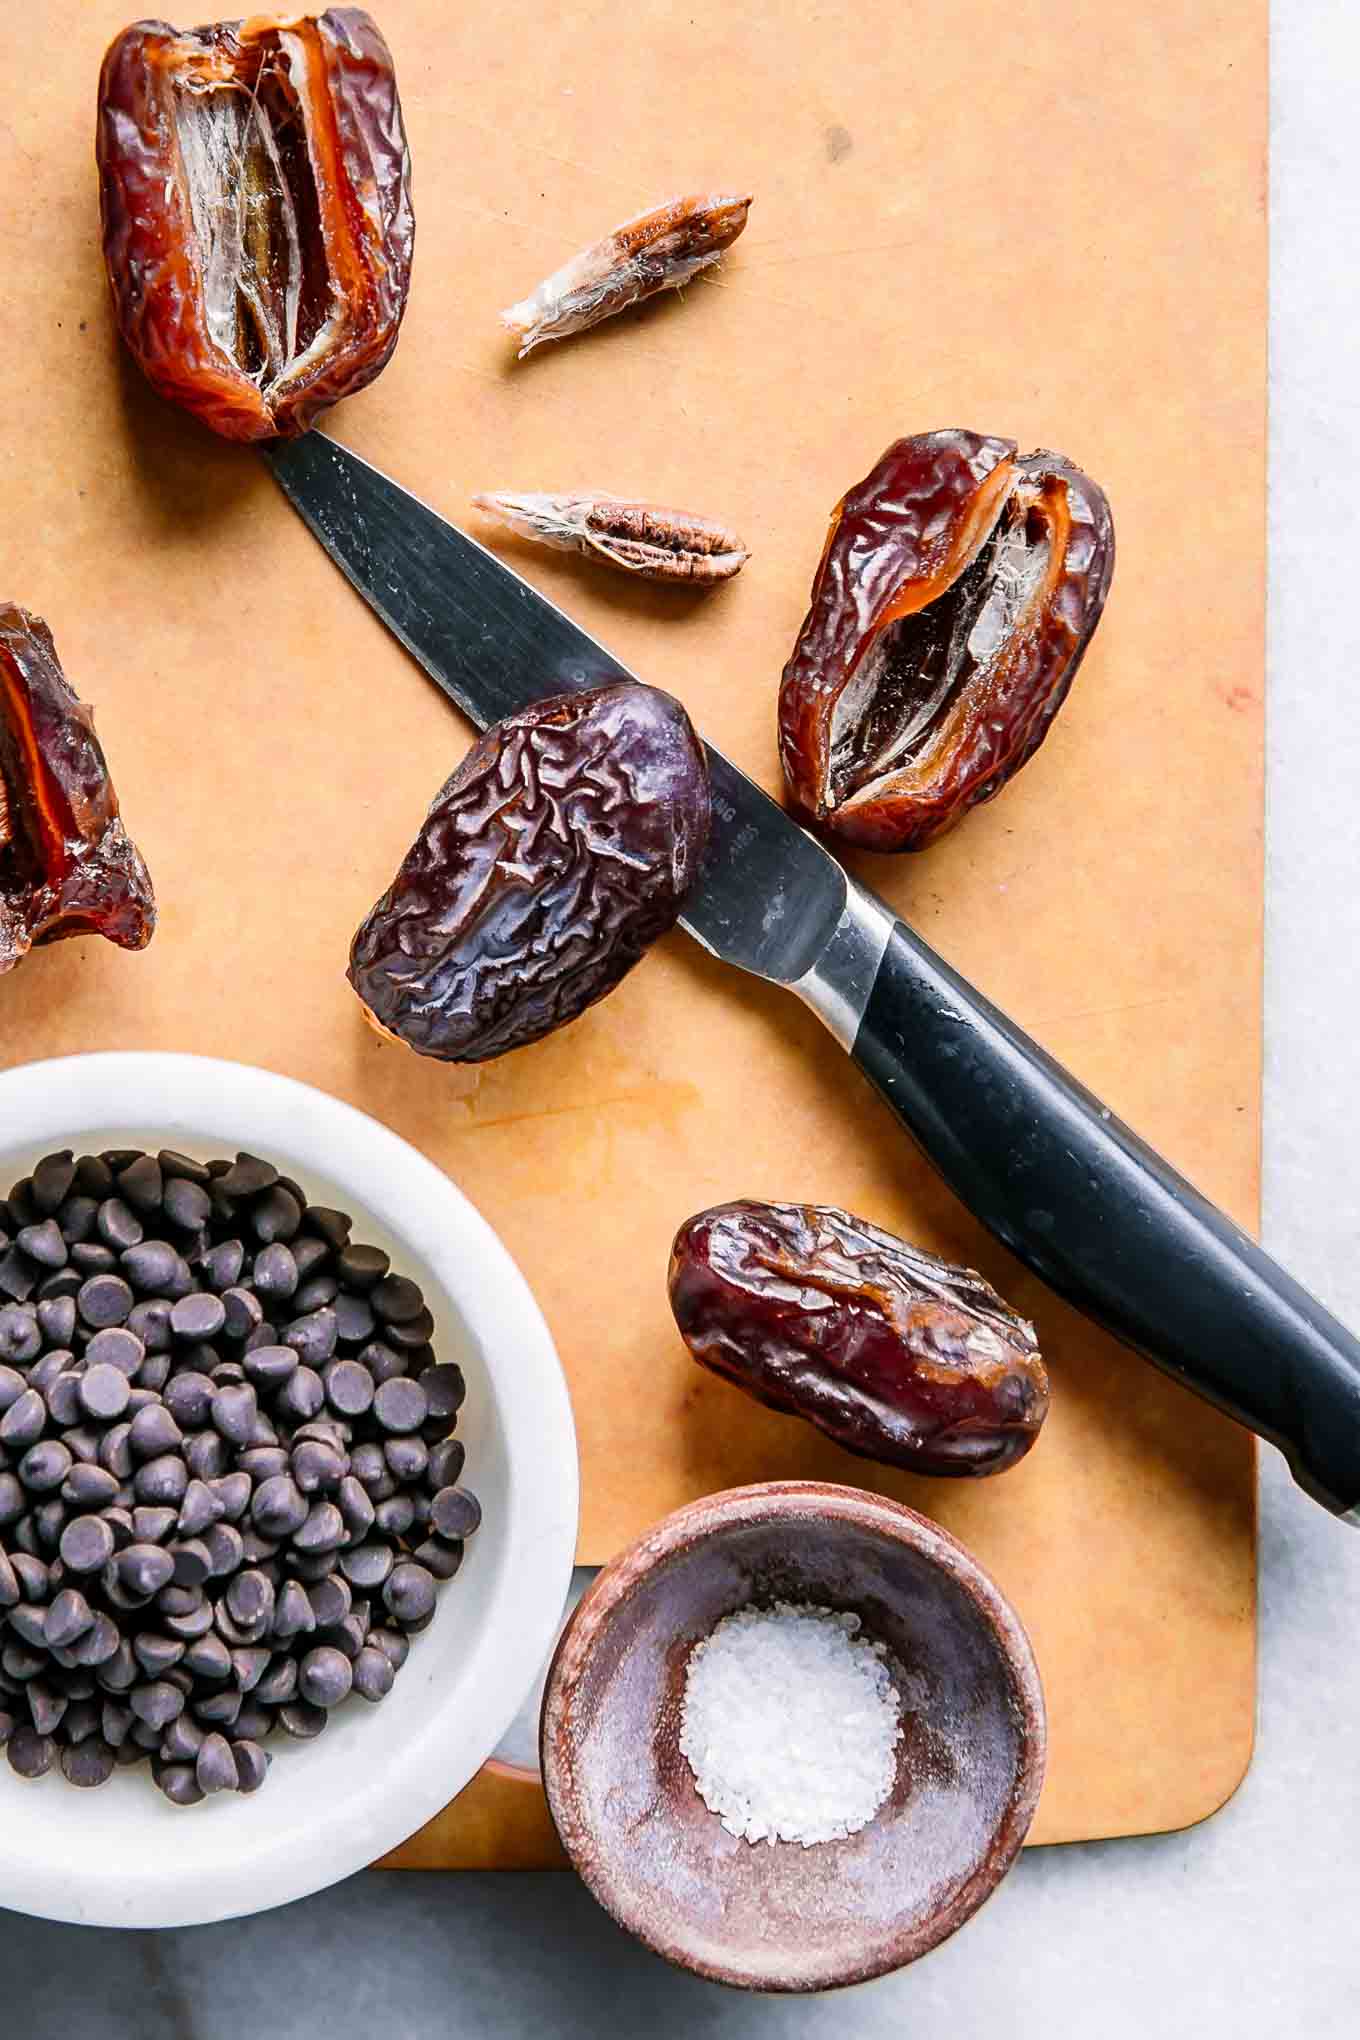 dates with seeds removed on a wood cutting board with a knife